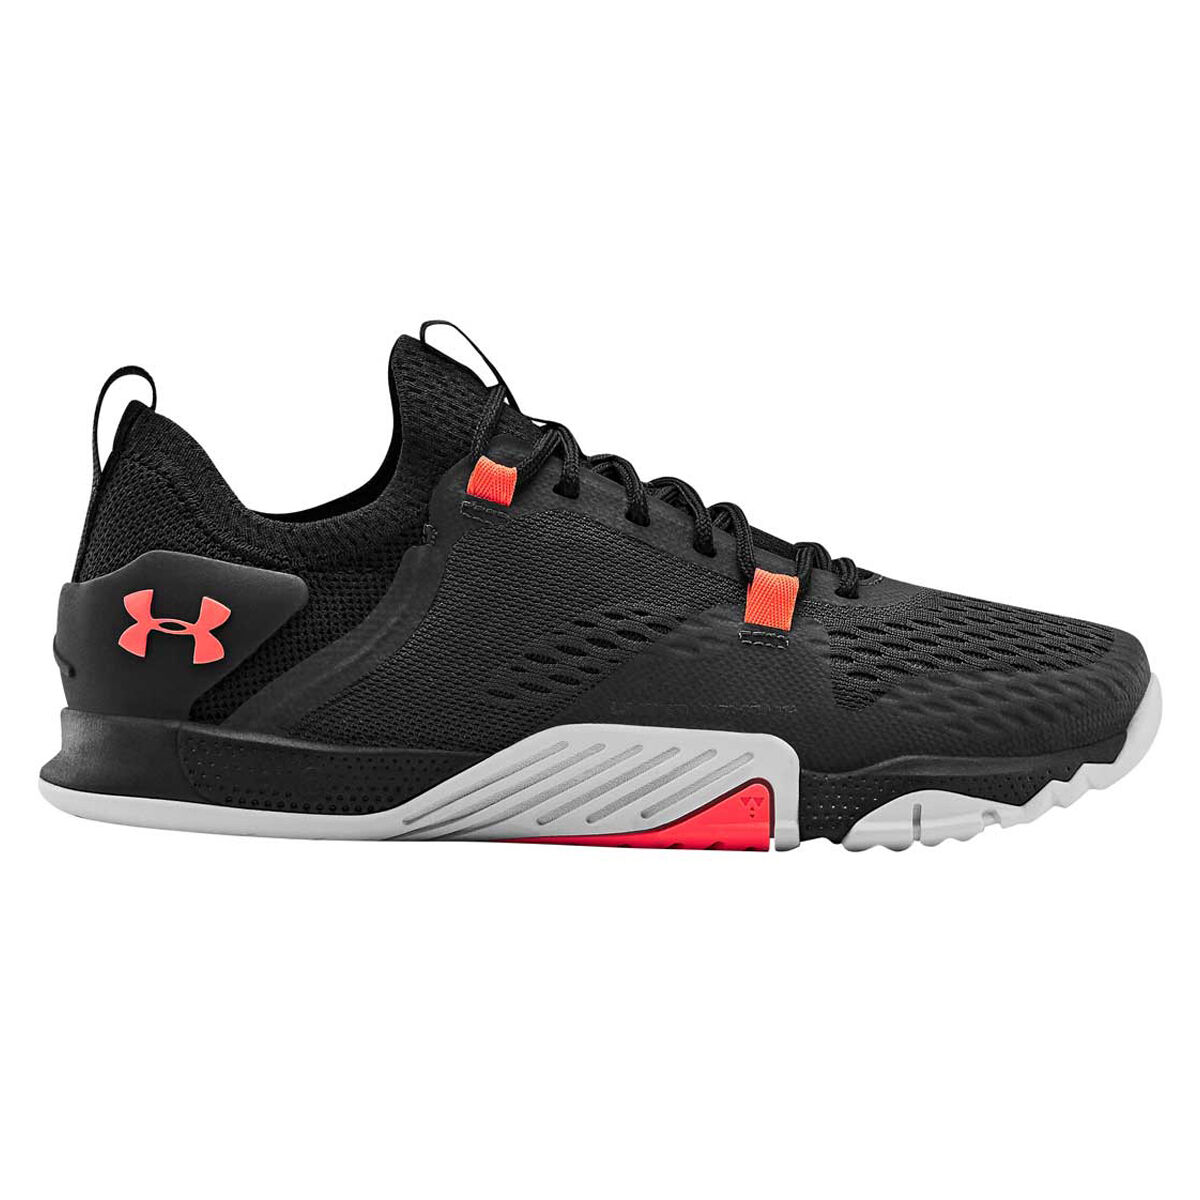 under armour women's shoes cross training